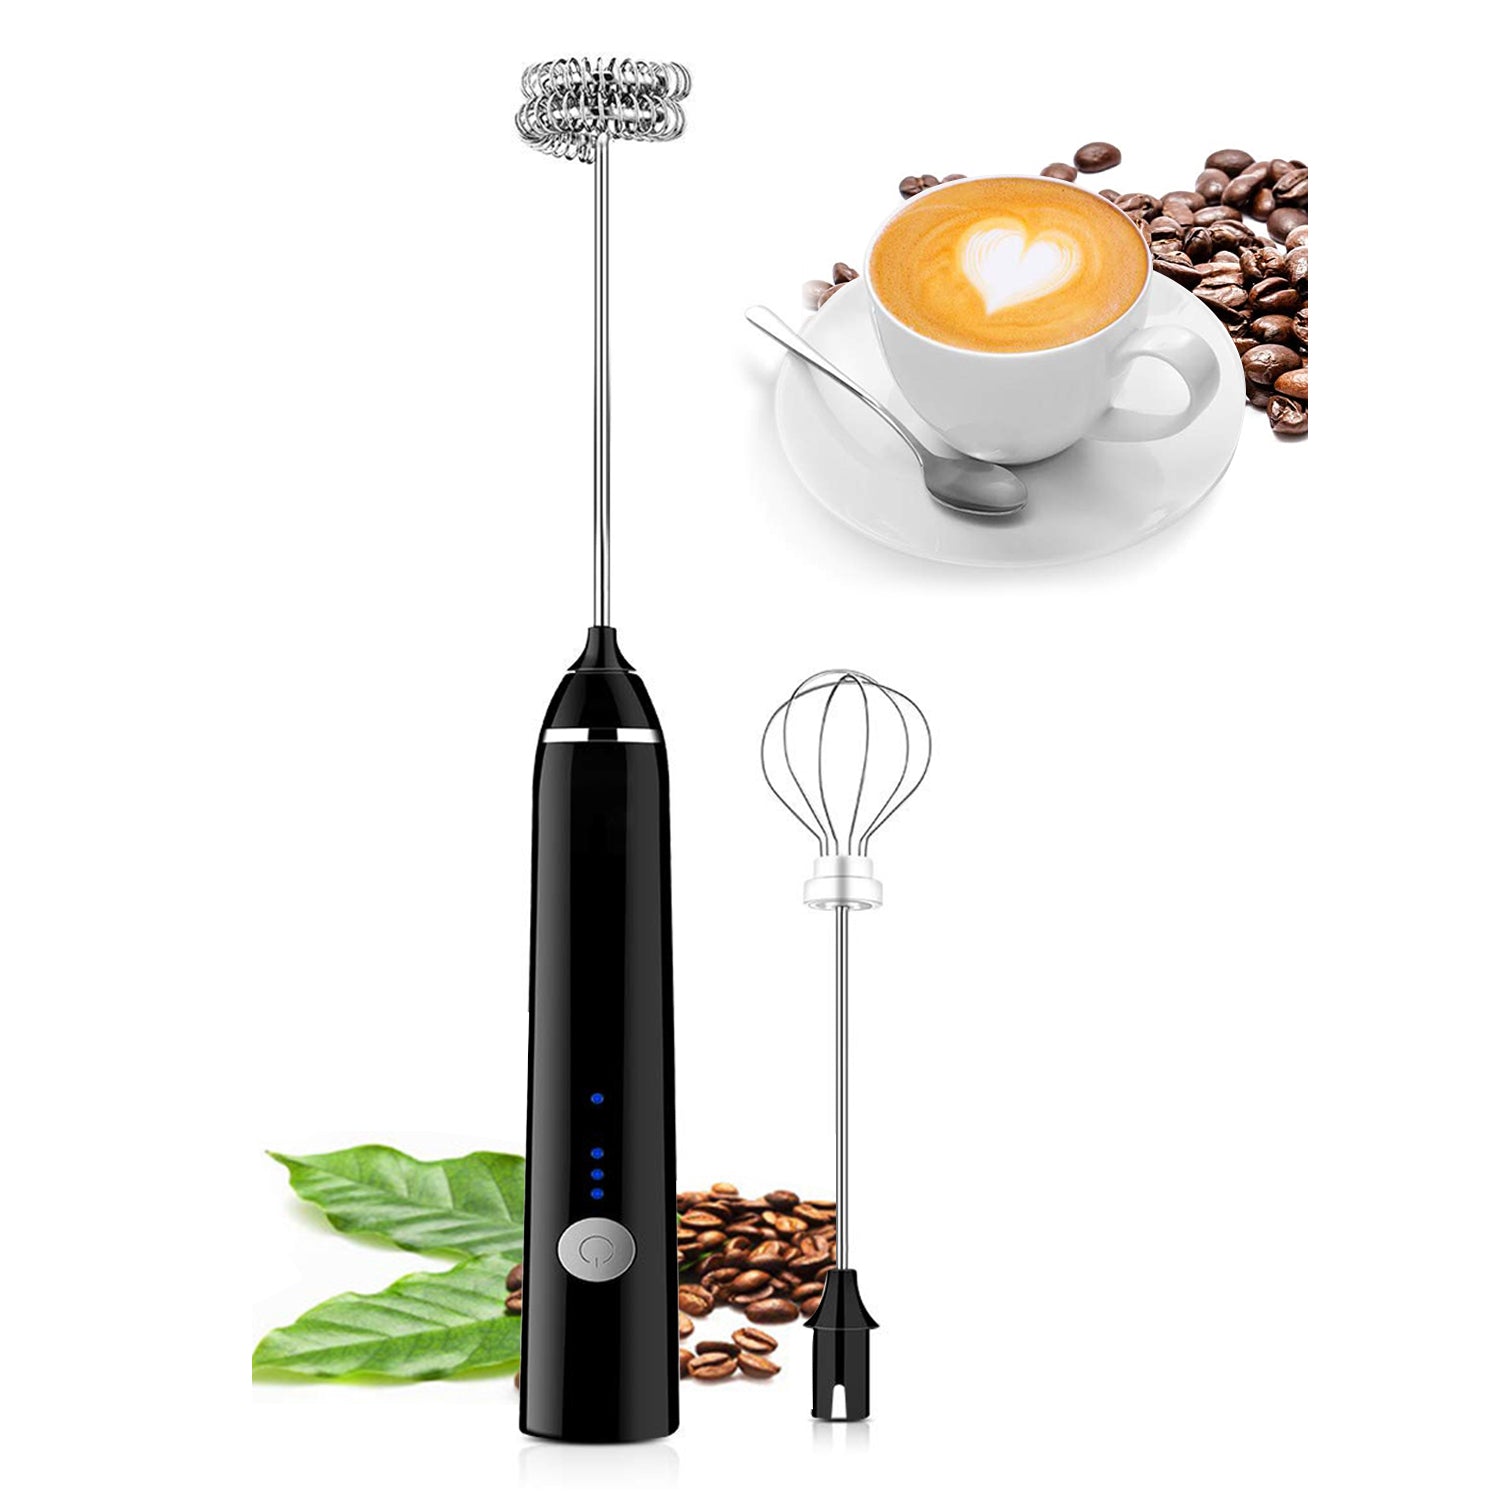 Milk Frother Handheld Electric Foam Maker Usb Rechargeable Coffee Frother  For Coffee, Latte, Cappuccino, Egg Whisks, Hot Chocolate